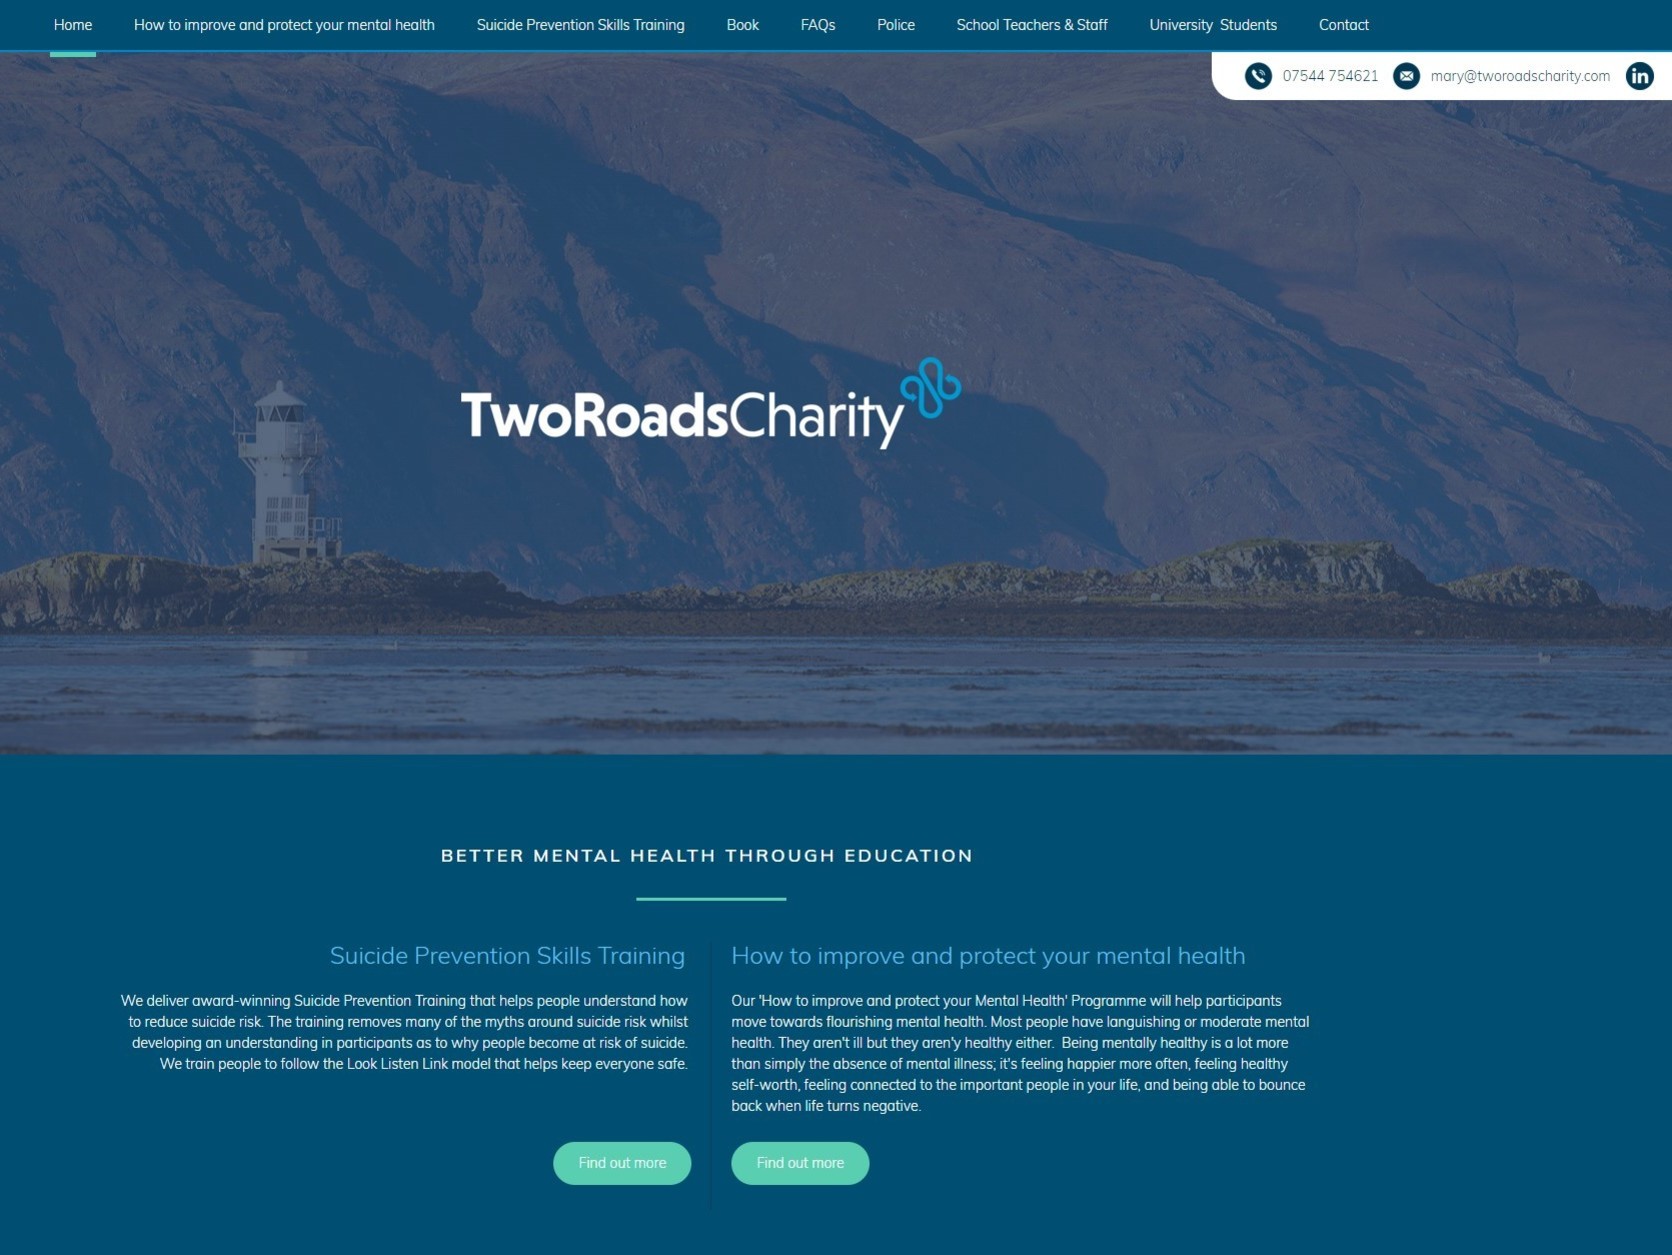 A website design belonging to a charity who supports better mental health through education